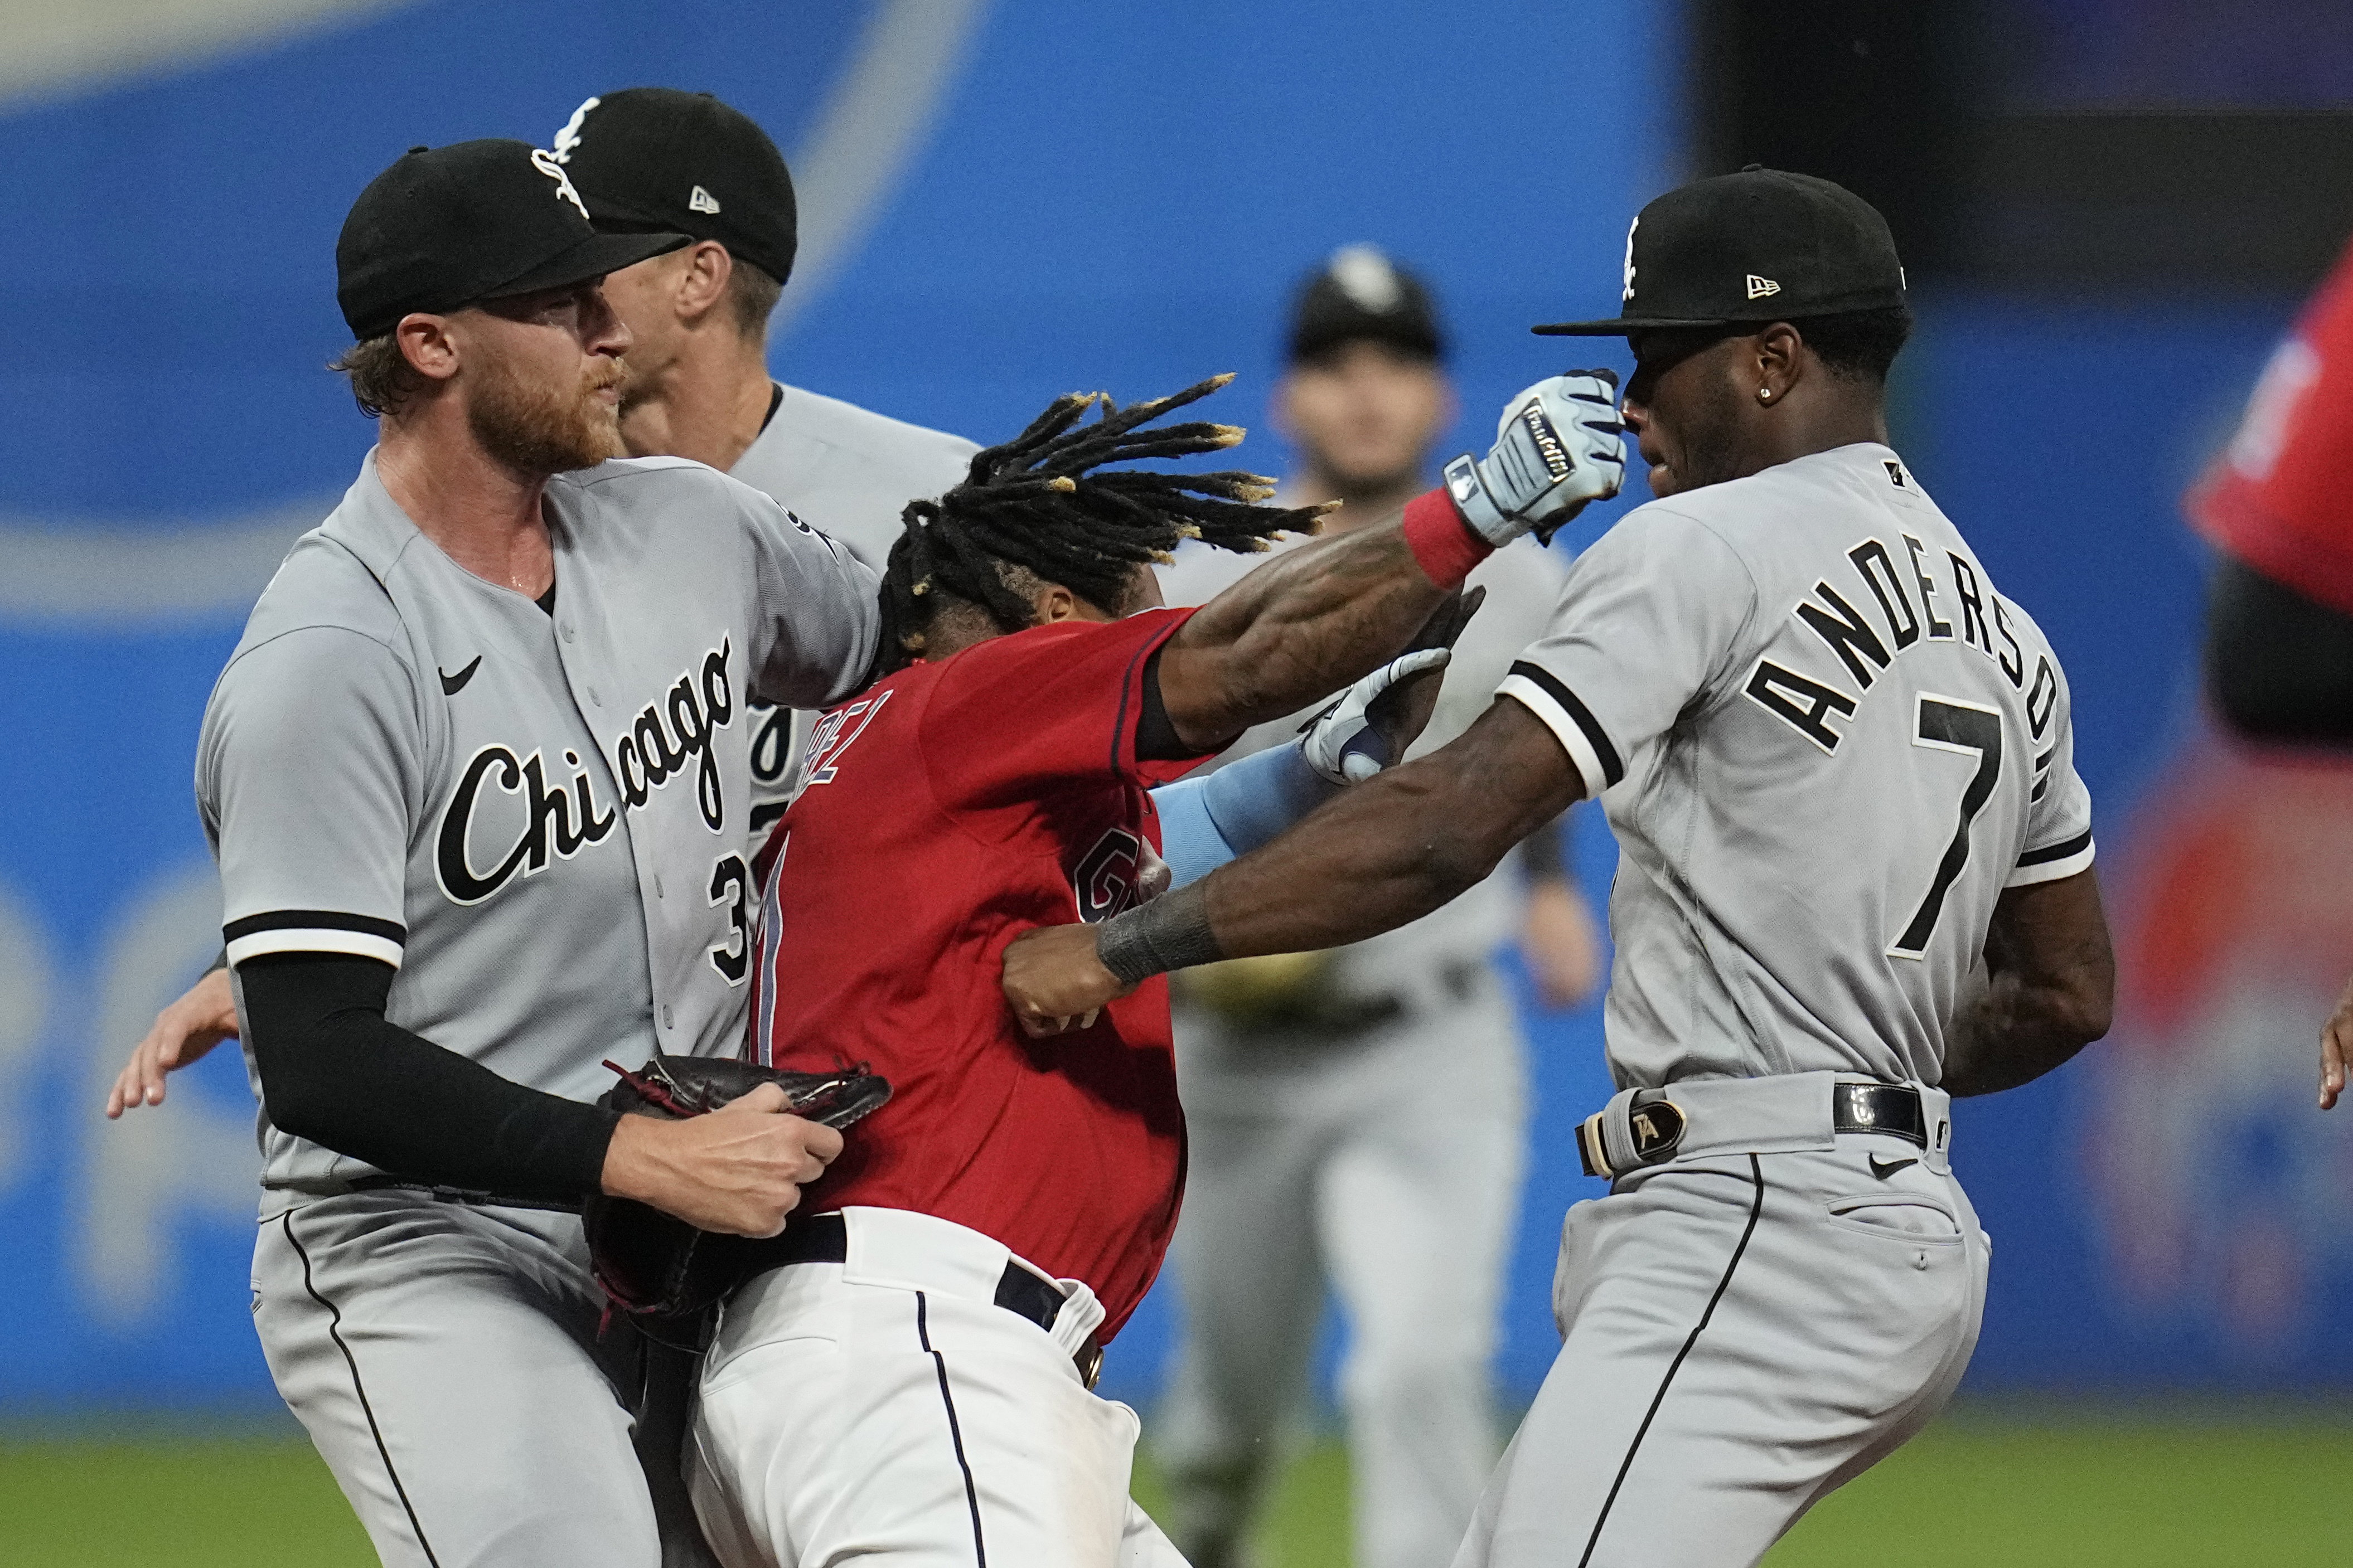 The White Sox All-Stars are happy to share the spotlight together